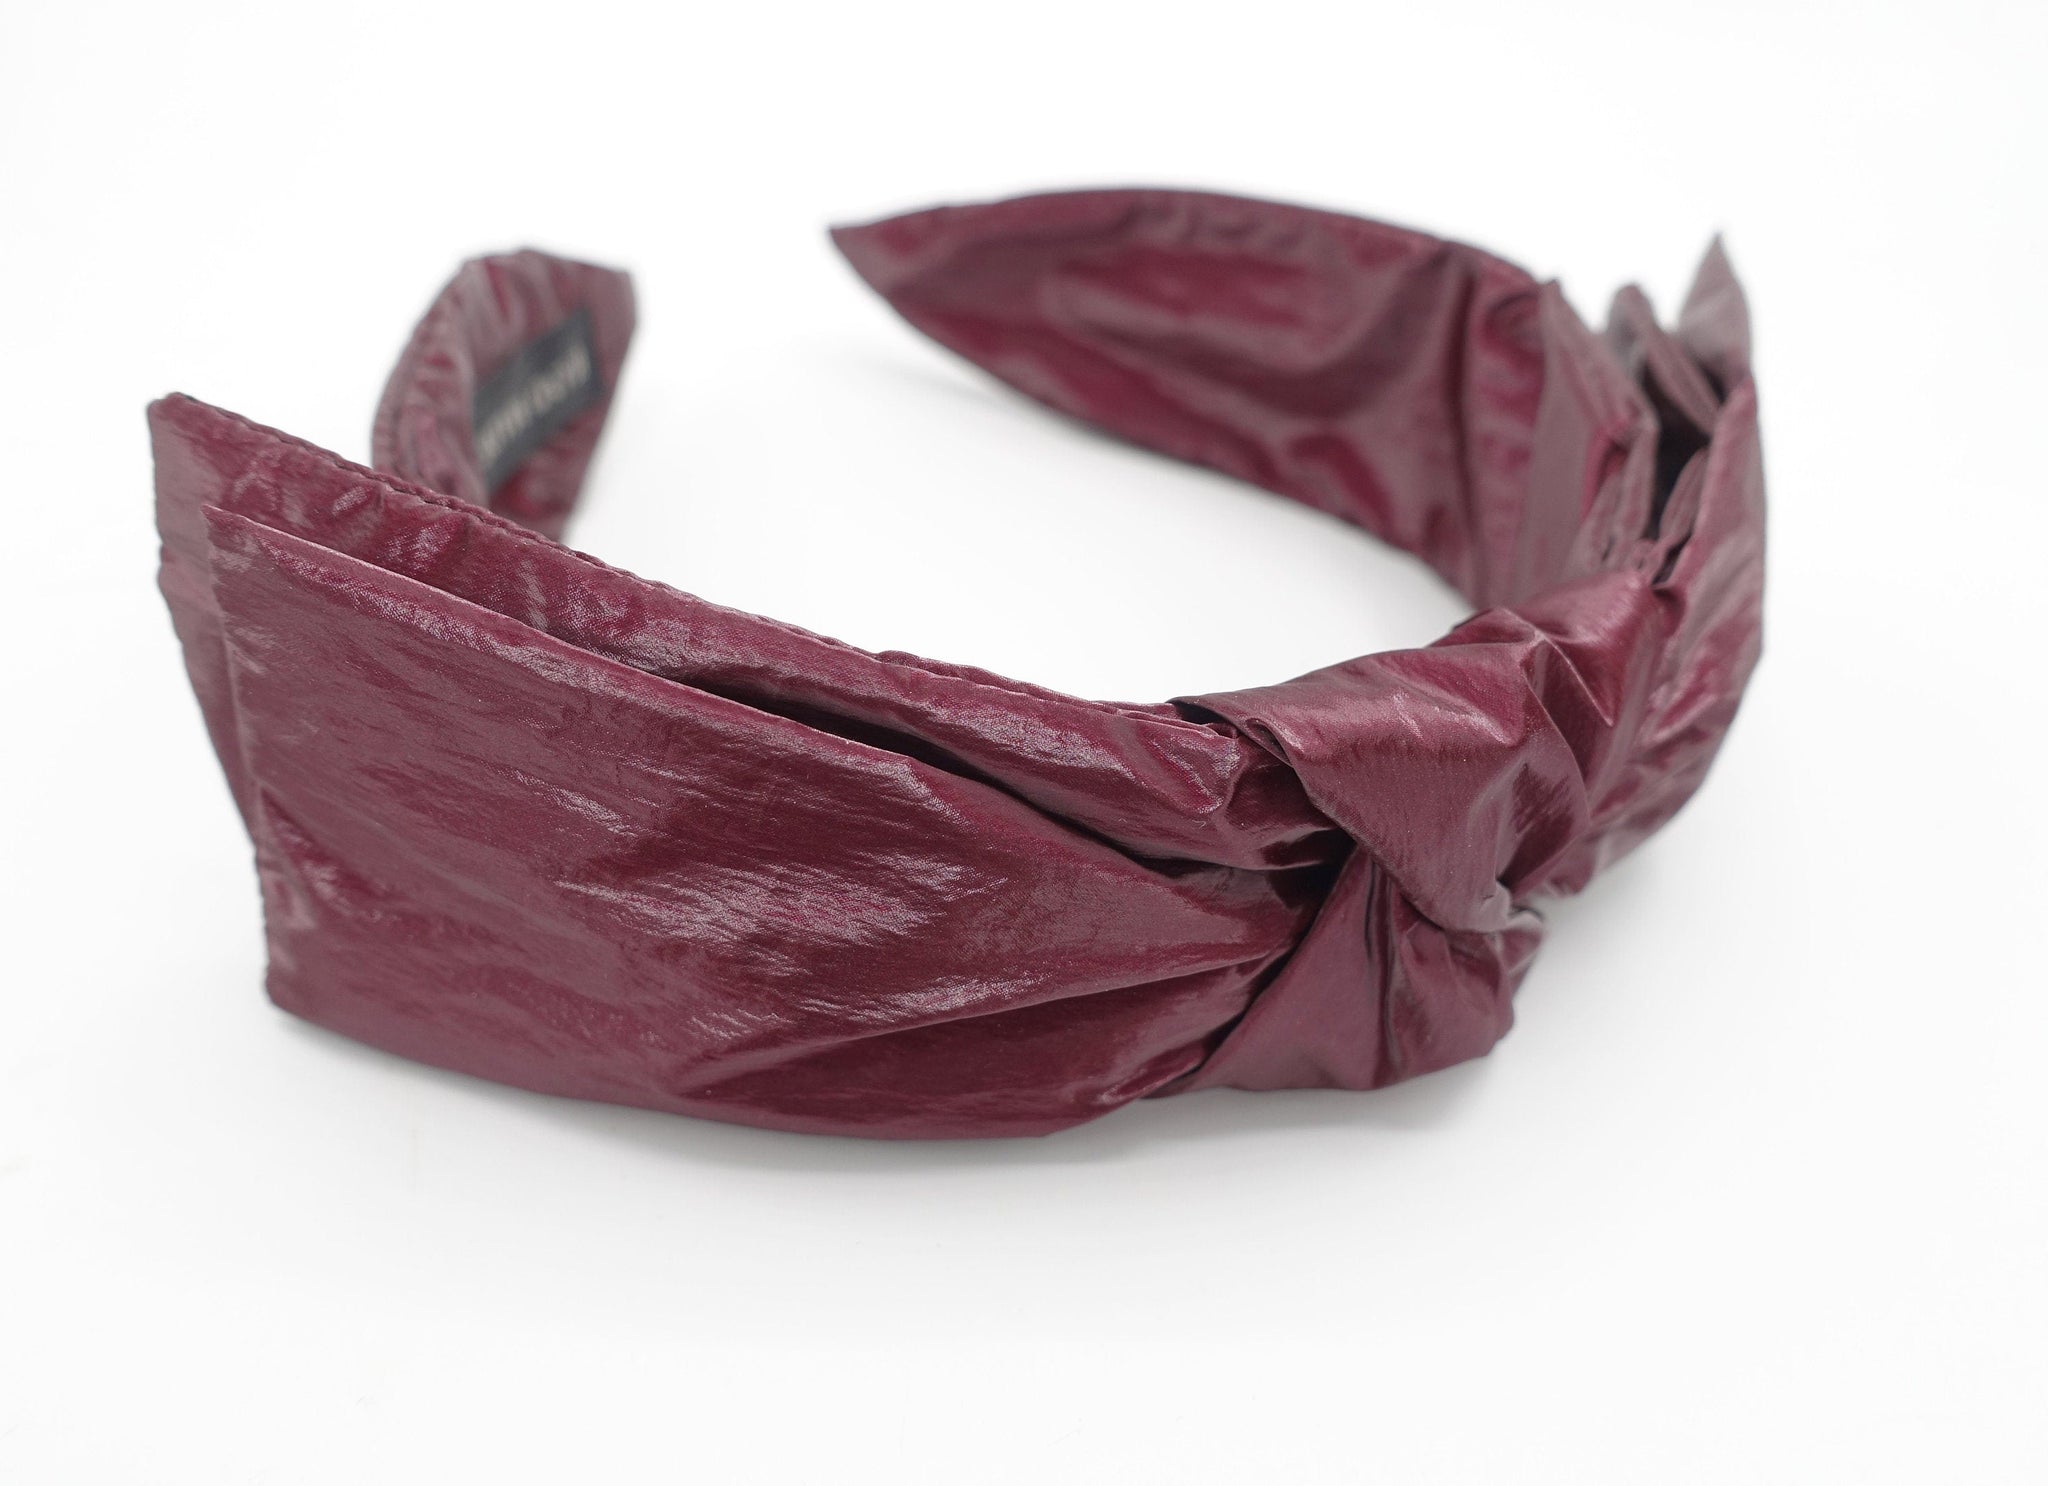 veryshine.com Headband Red wine double layered wire bow tie headband reflective coated fabric hairband unique hair accessory for women